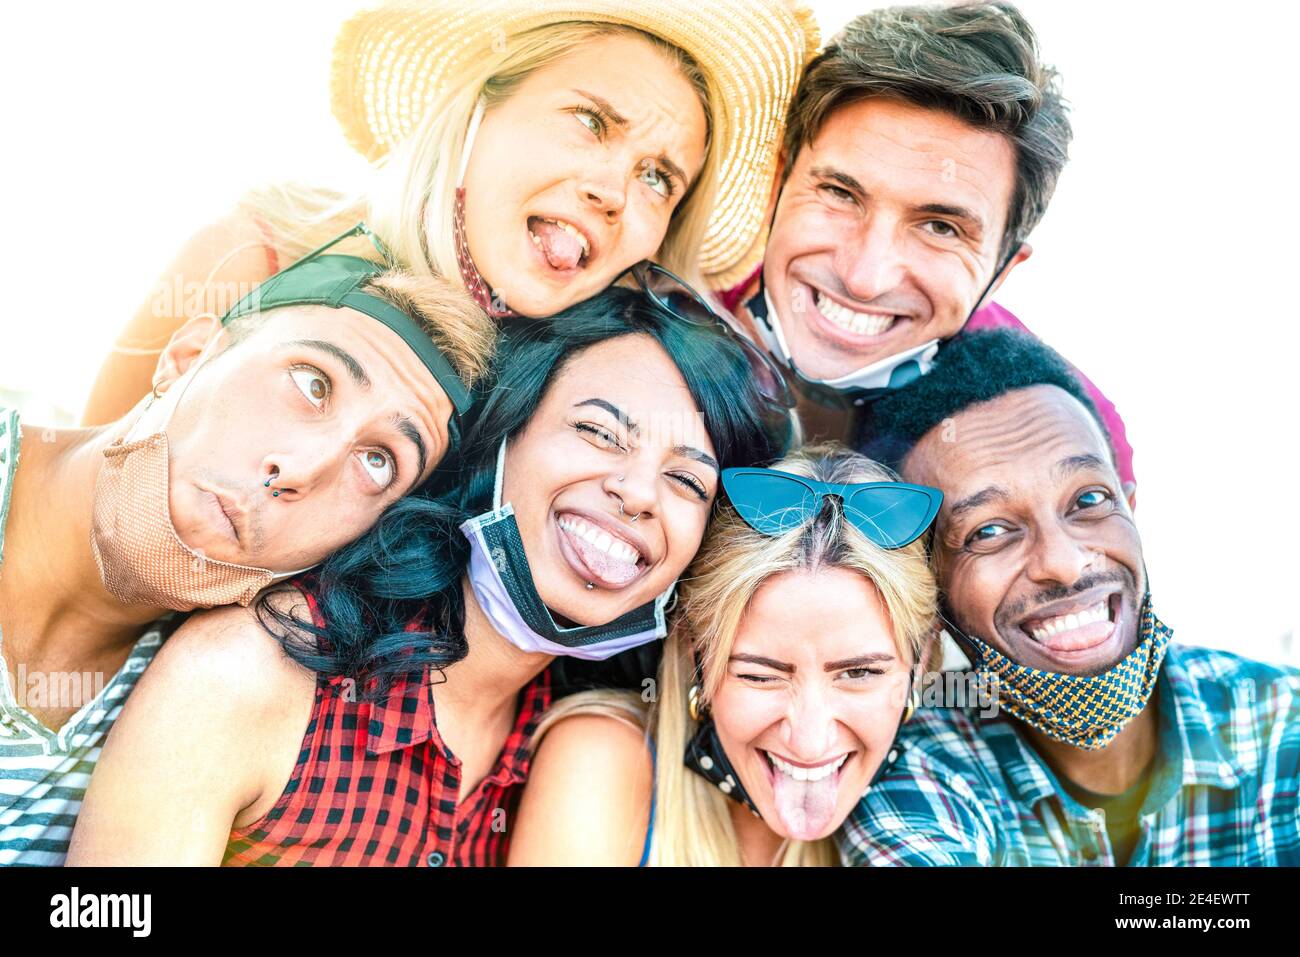 Multiracial friends taking crazy selfie with open face masks - New normal friendship concept with young people having fun together Stock Photo